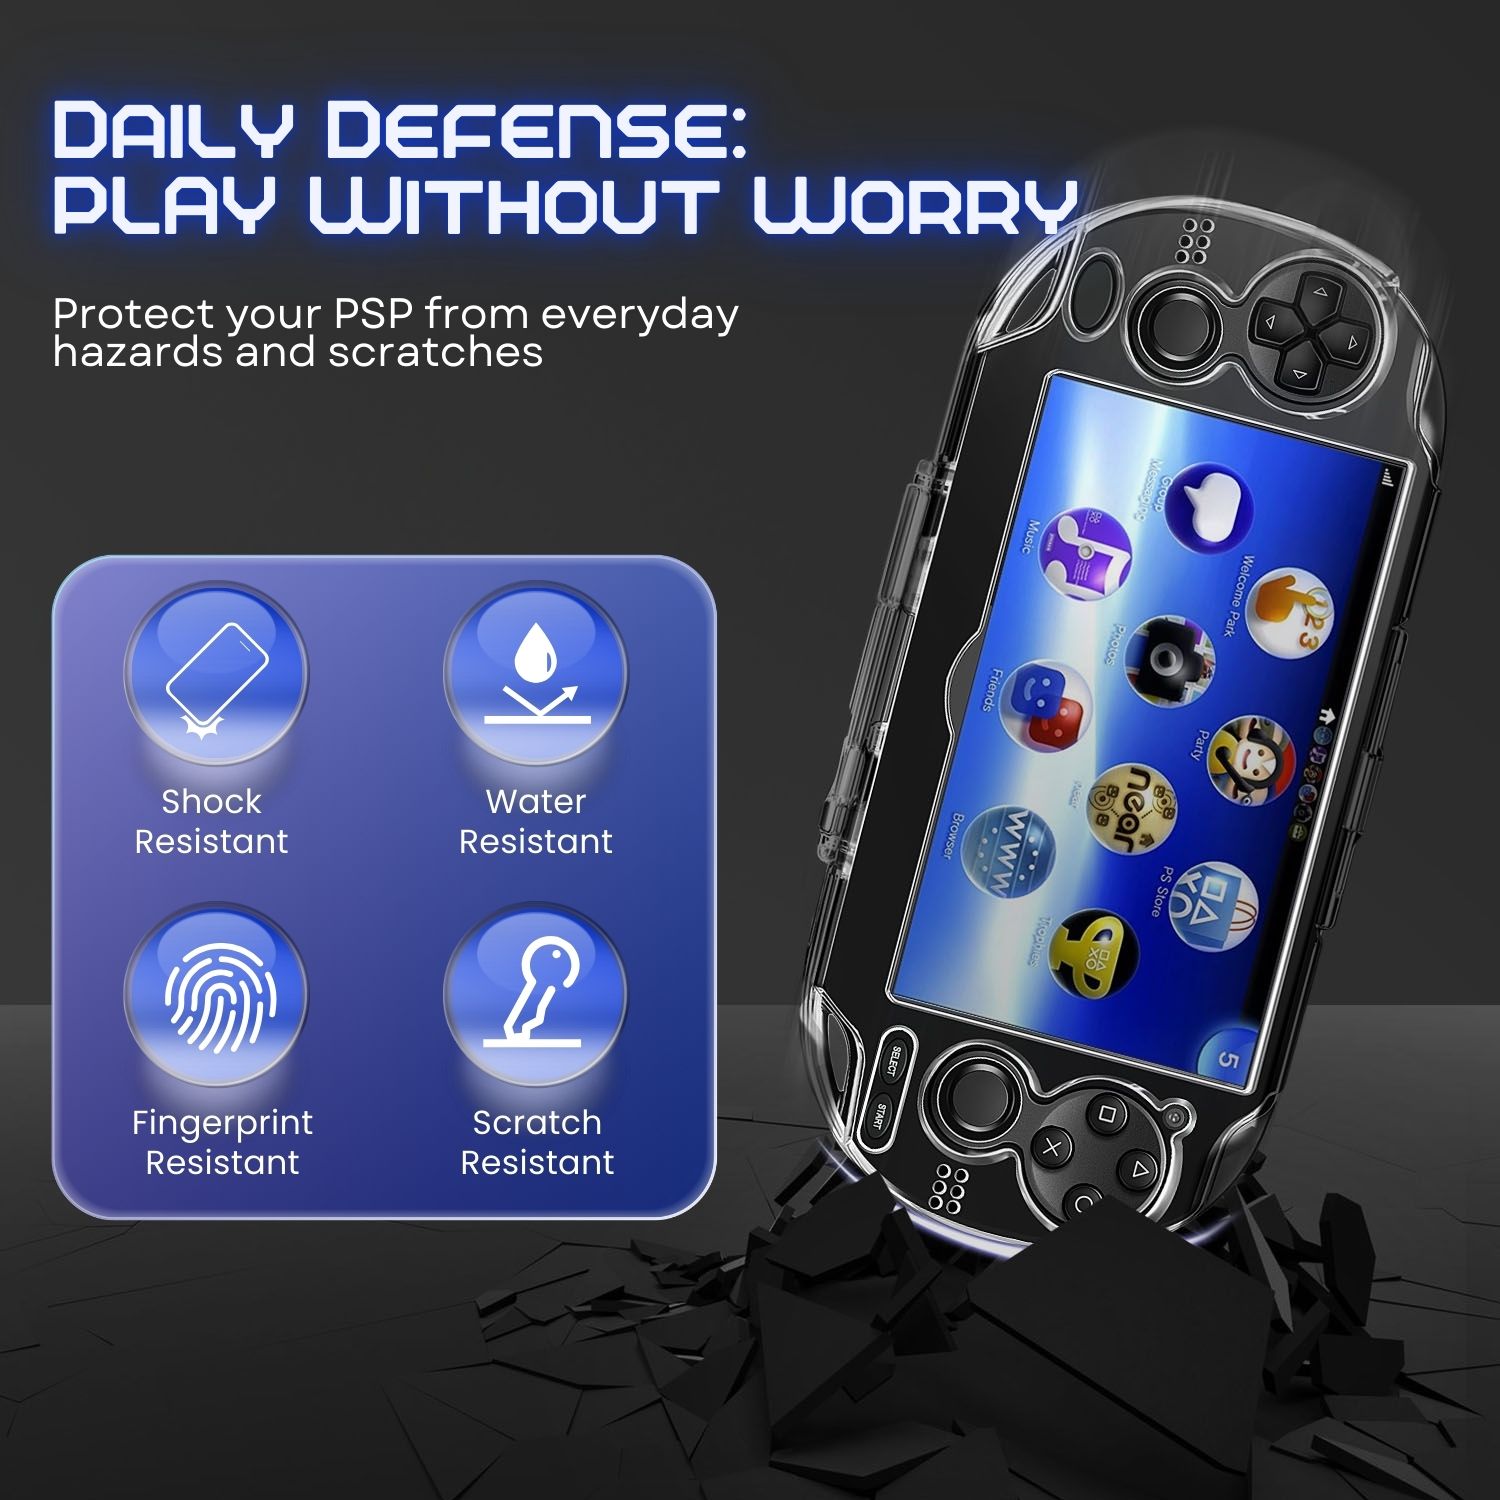 Installation Made Easy: This crystal clear hard cover for PS Vita 1000 with its snap-in design made it easy to install and remove, providing an instant, secure, and convenient solution for gamers on the go